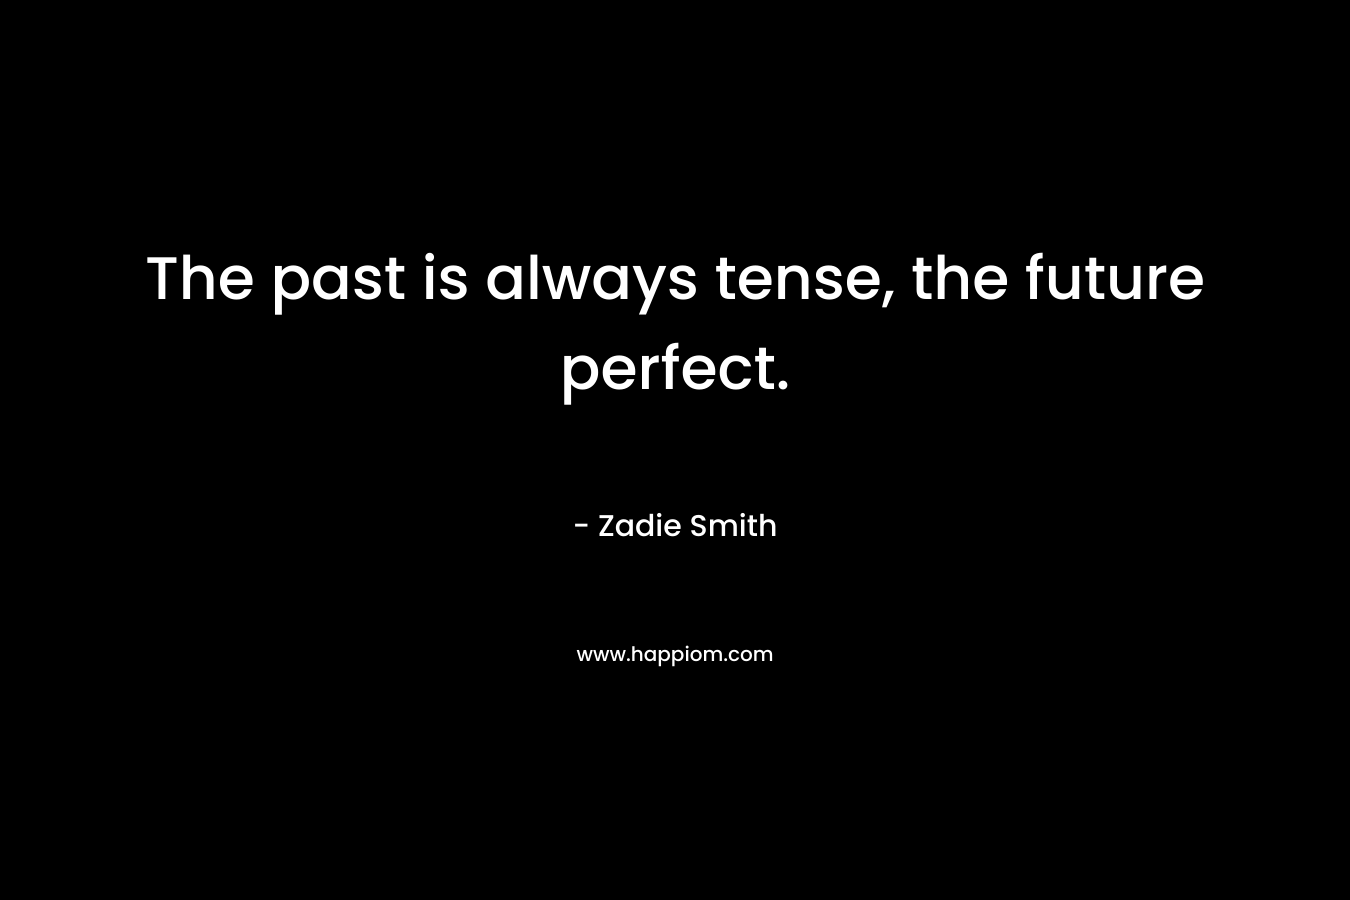 The past is always tense, the future perfect.